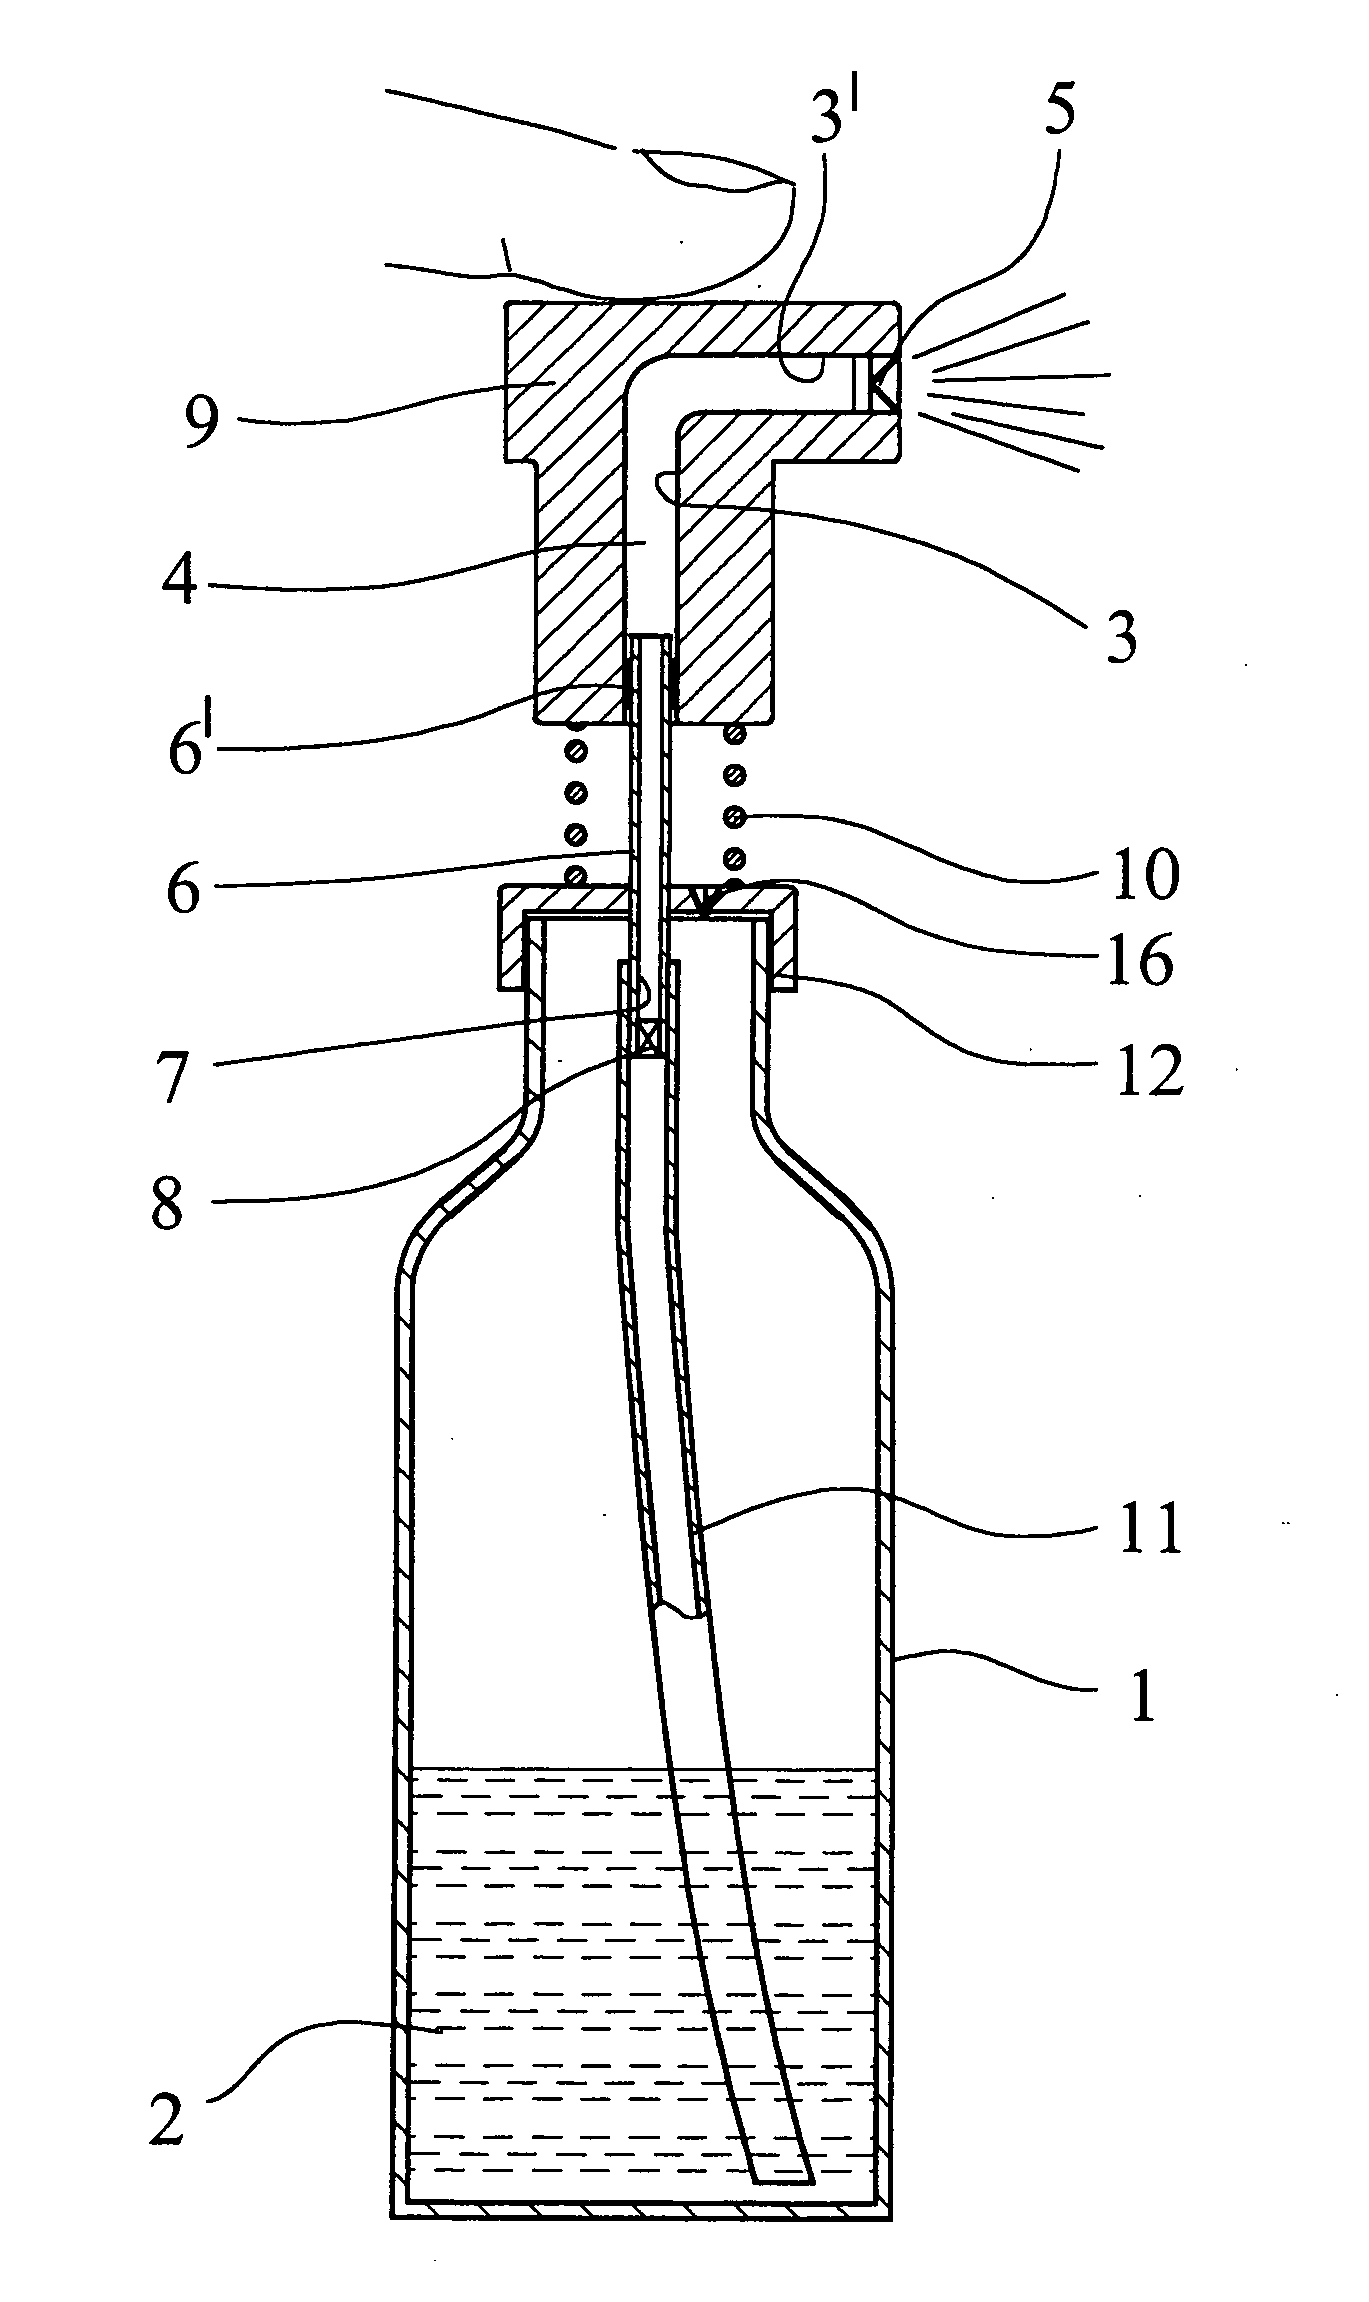 Finger operated spray pump